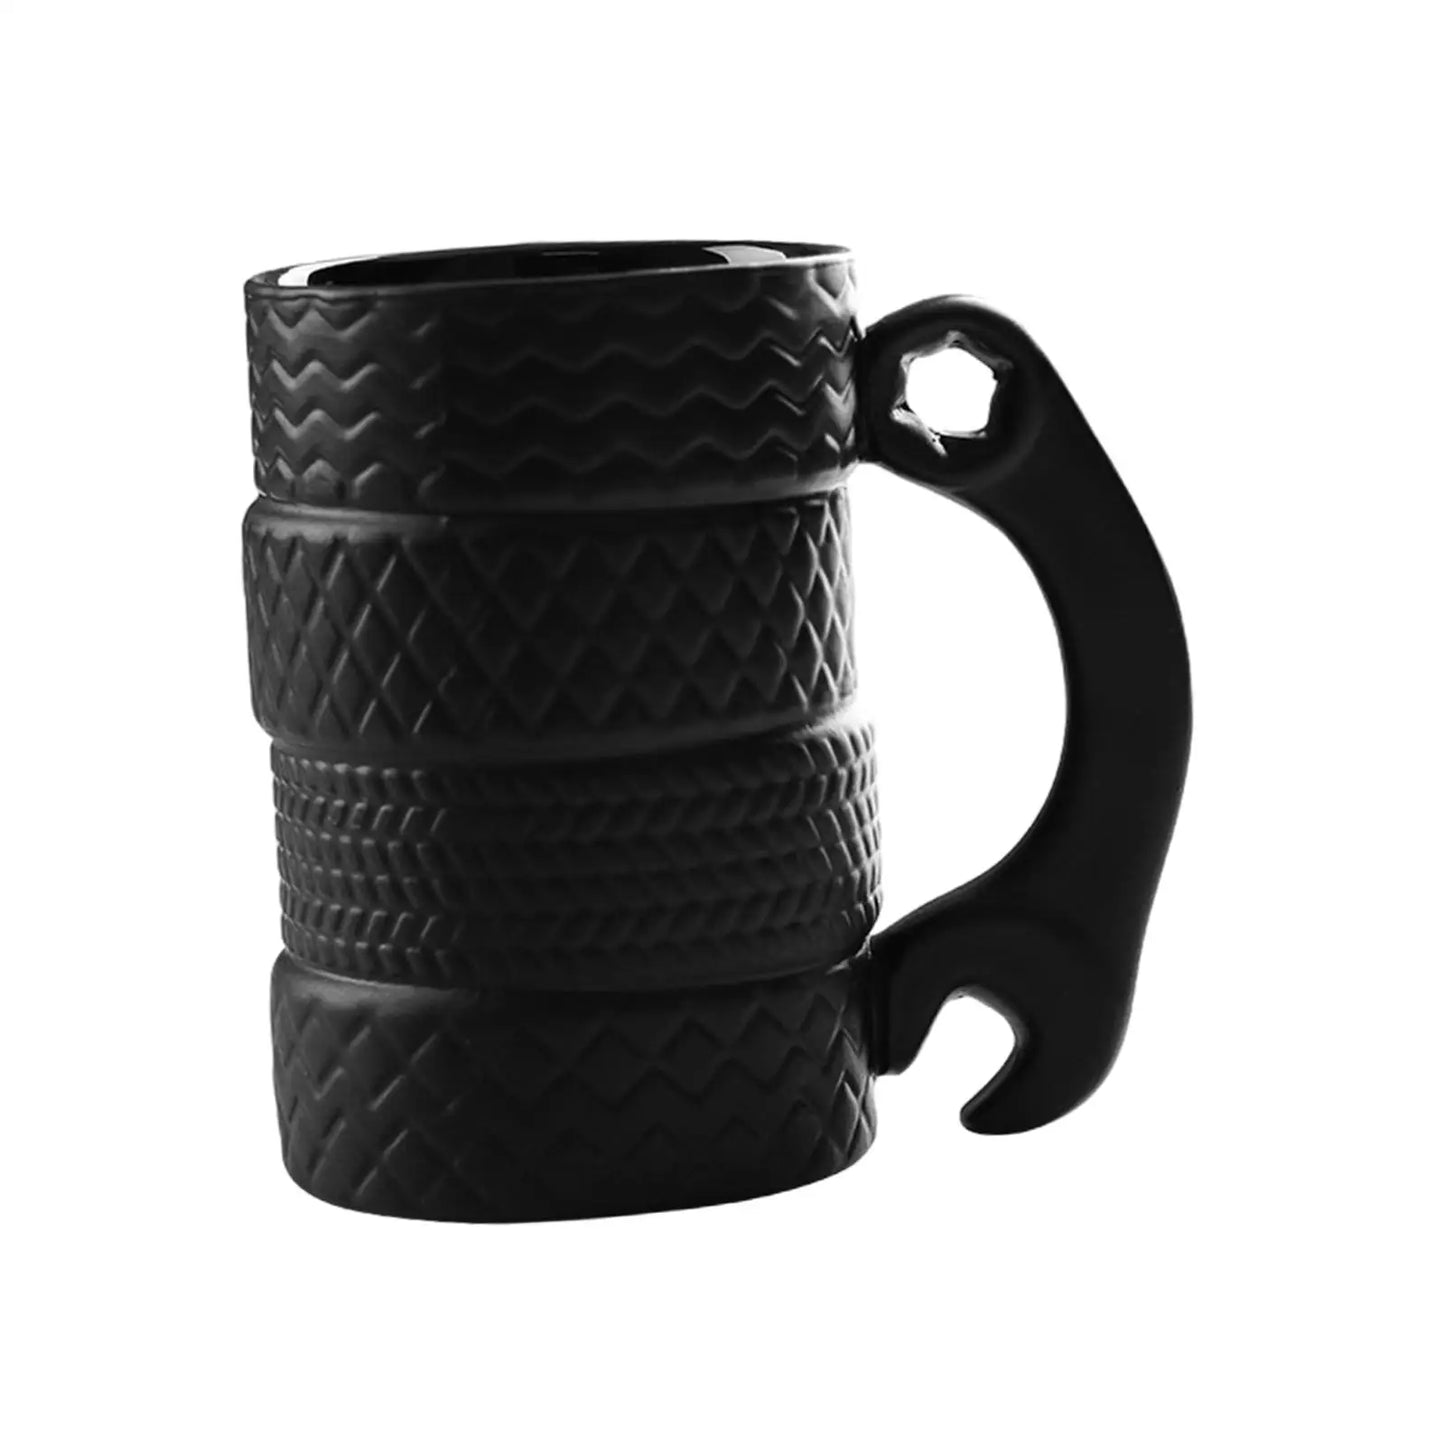 Wheel Tire Coffee Mug Drinkware Birthday Gift Unique with Handle Collections Breakfast Cup for Car Lovers Beverage Cup Creative